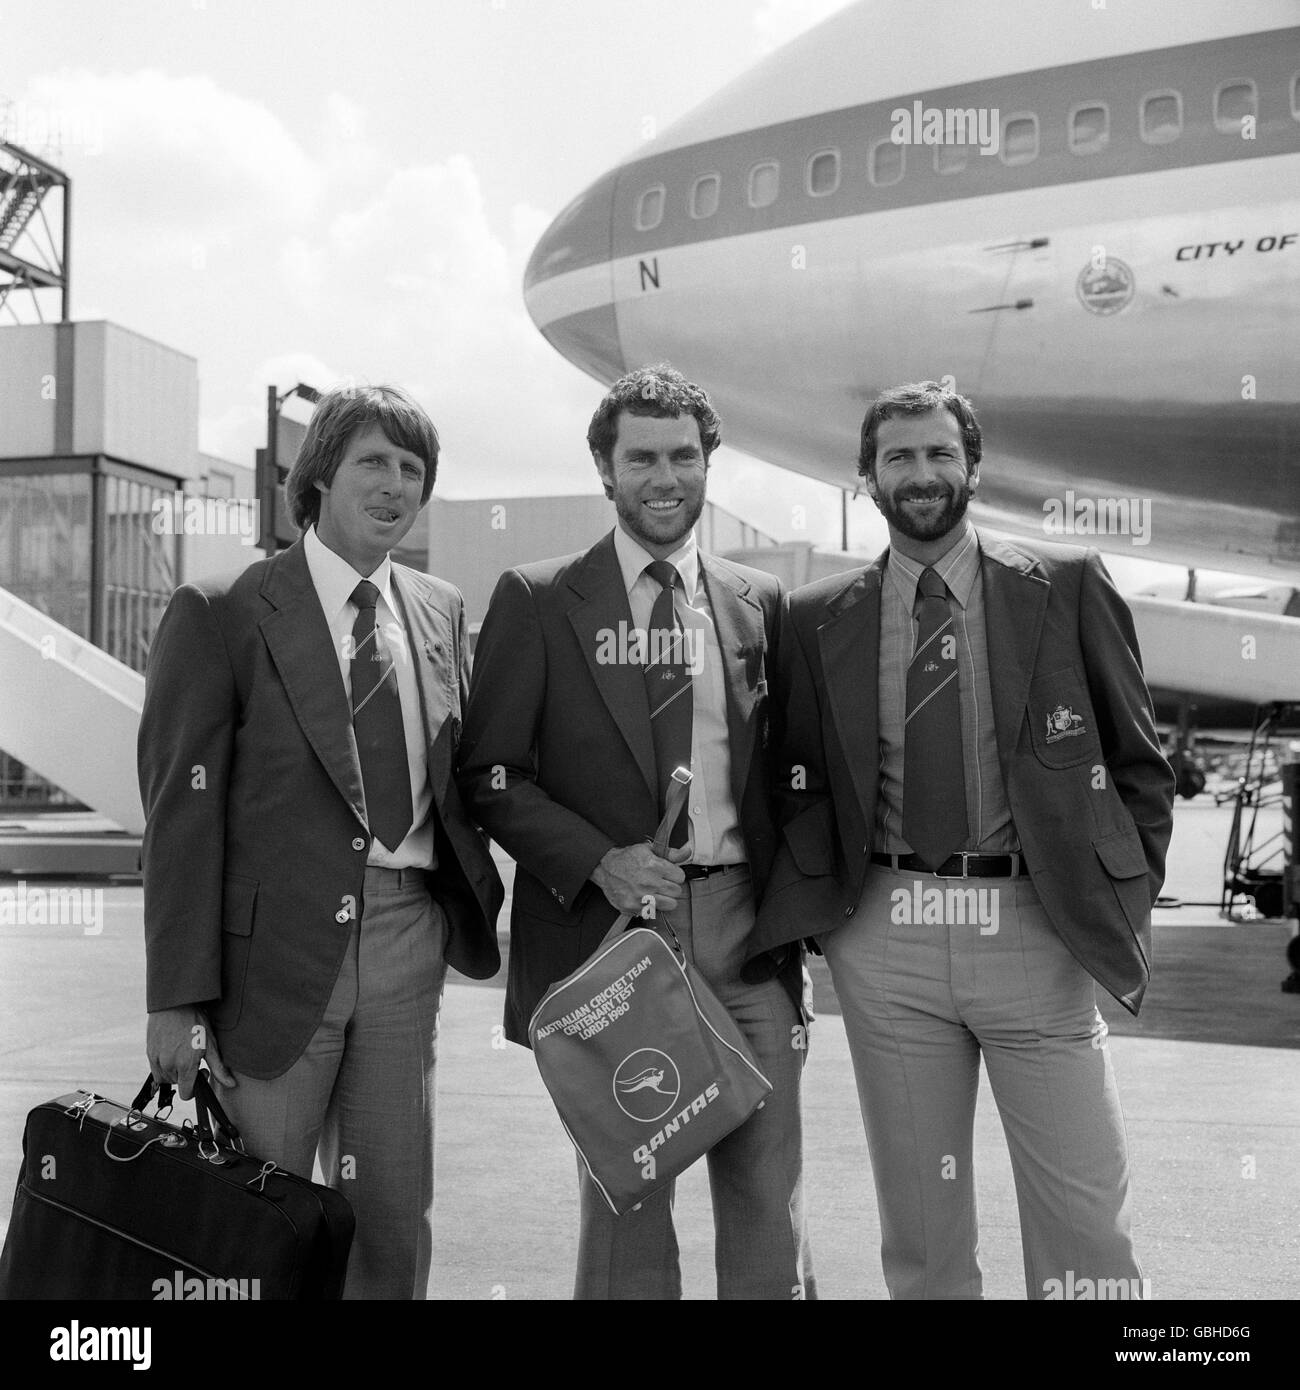 Australian cricket captain Greg Chappell flanked by fast bowlers Jeff Thomson, left, and Dennis Lillee at Heathrow Airport when they arrived in preparation for the Centenary Test against England. Stock Photo